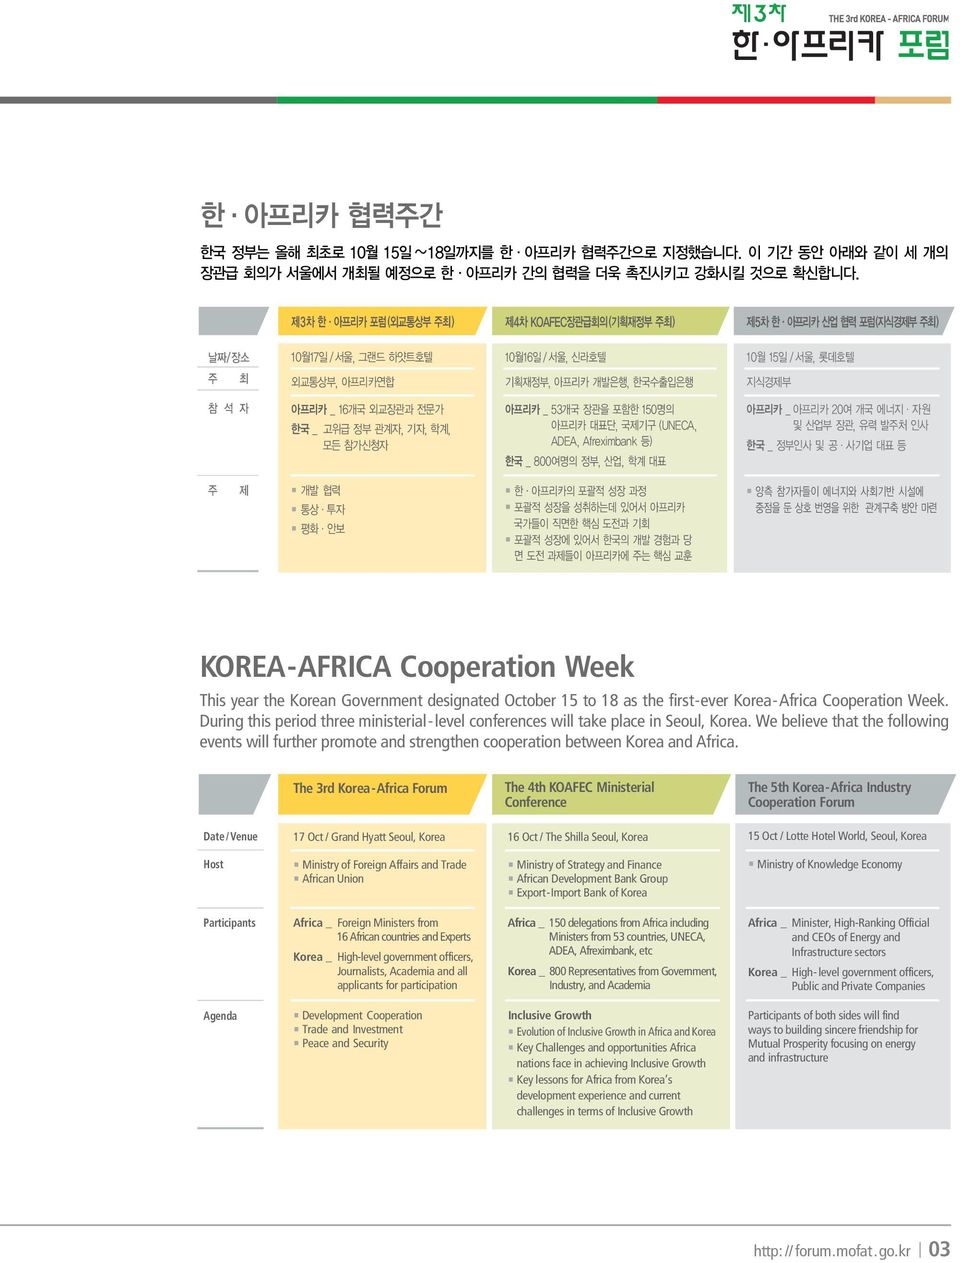 The 3rd Korea-Africa Forum The 4th KOAFEC Ministerial Conference The 5th Korea-Africa Industry Cooperation Forum Date / Venue 17 Oct / Grand Hyatt Seoul, Korea 16 Oct / The Shilla Seoul, Korea 15 Oct